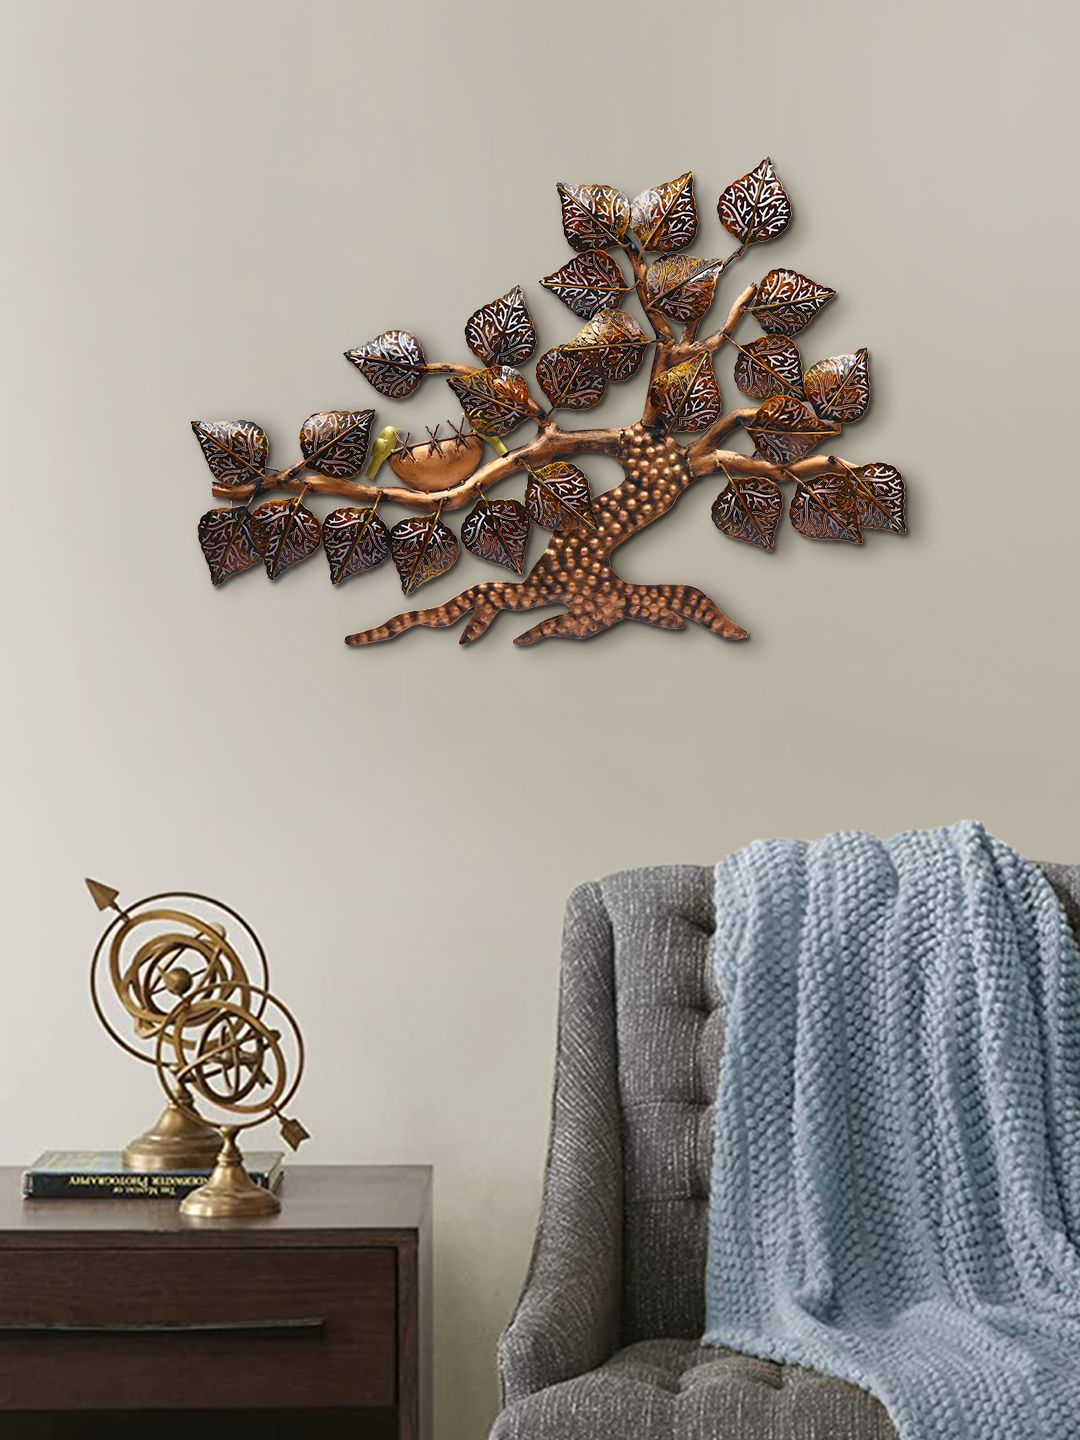 Aapno Rajasthan Gold-Toned Vibrant Birds & Trees Wall Decor Price in India